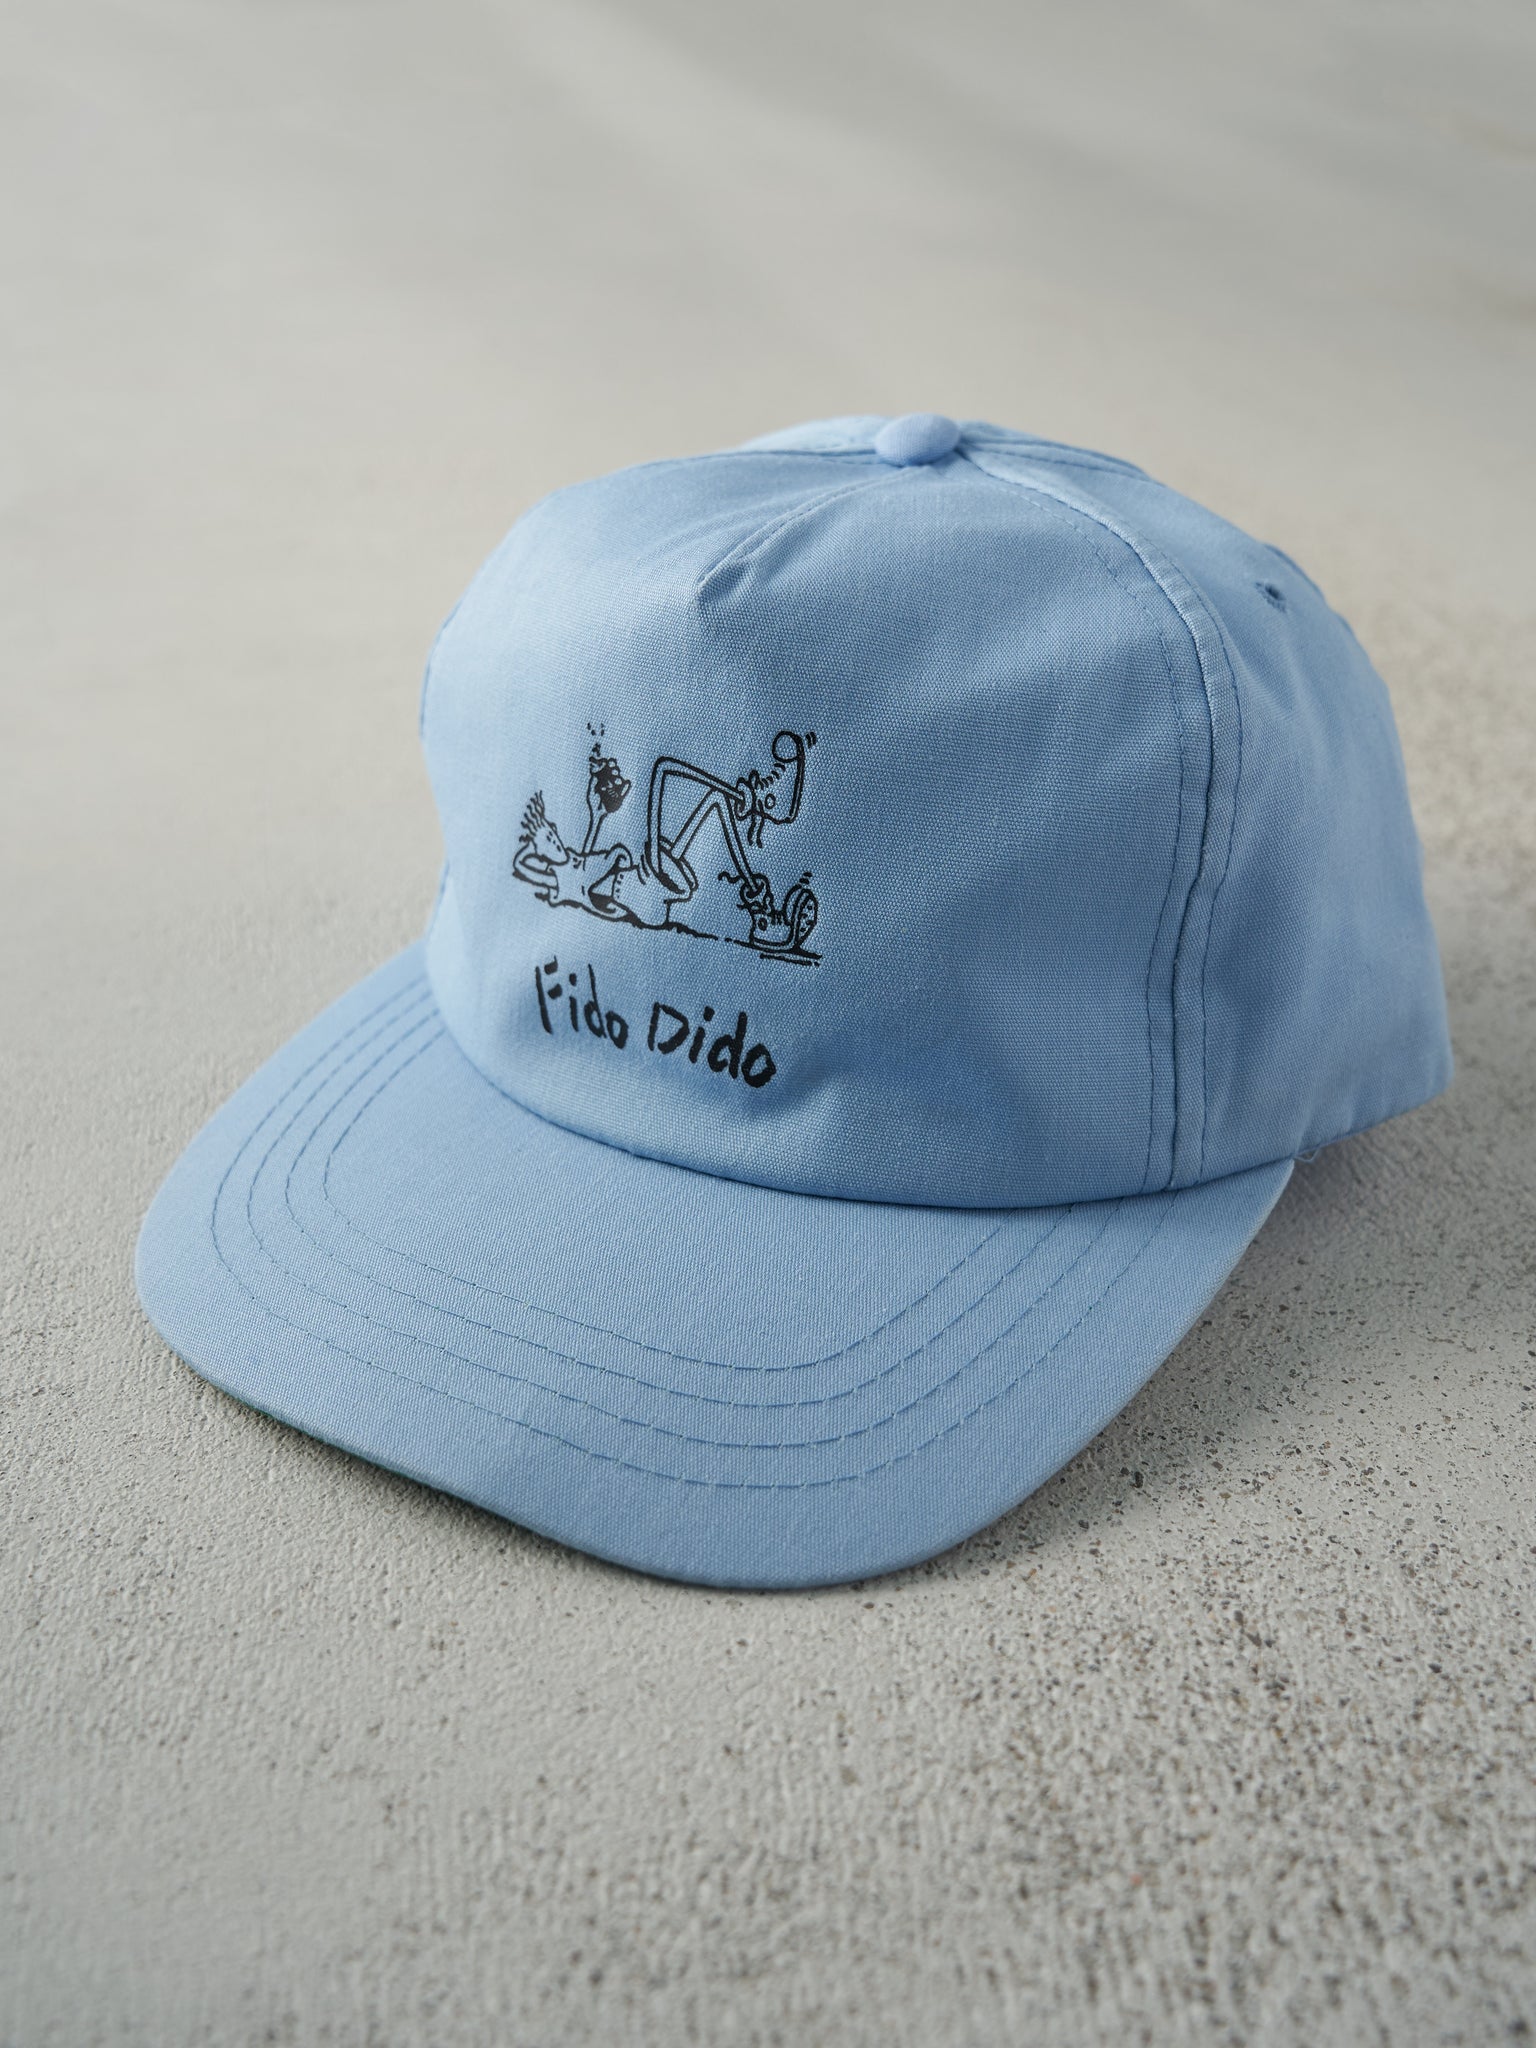 Vintage 90s Baby Blue "Fido Dido" 7UP Snapback Hat